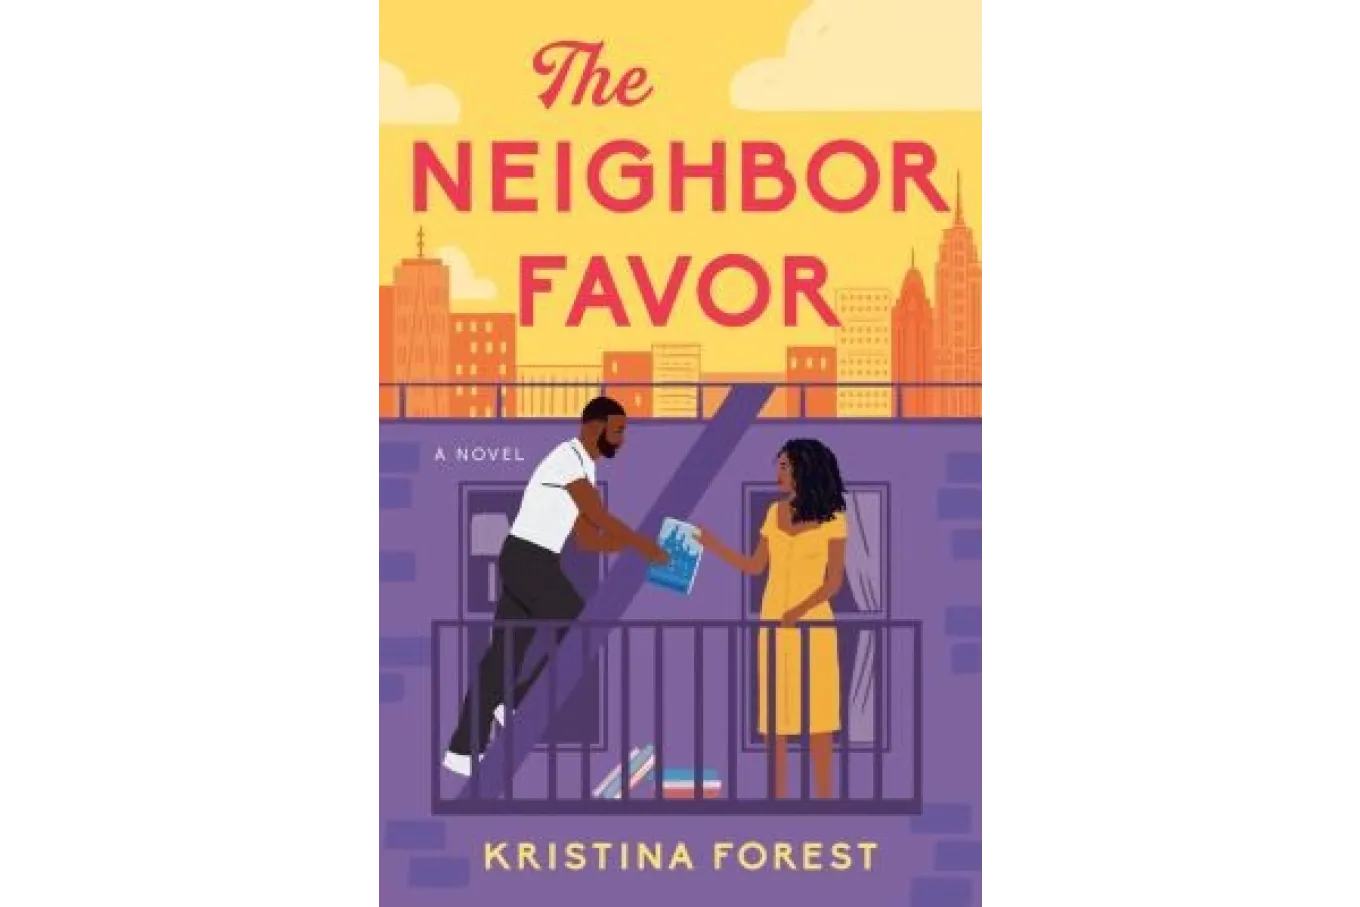 cover of The Neighbor Favor. A Black couple is on a fire escape with a yellow and purple background. They are exchanging books.